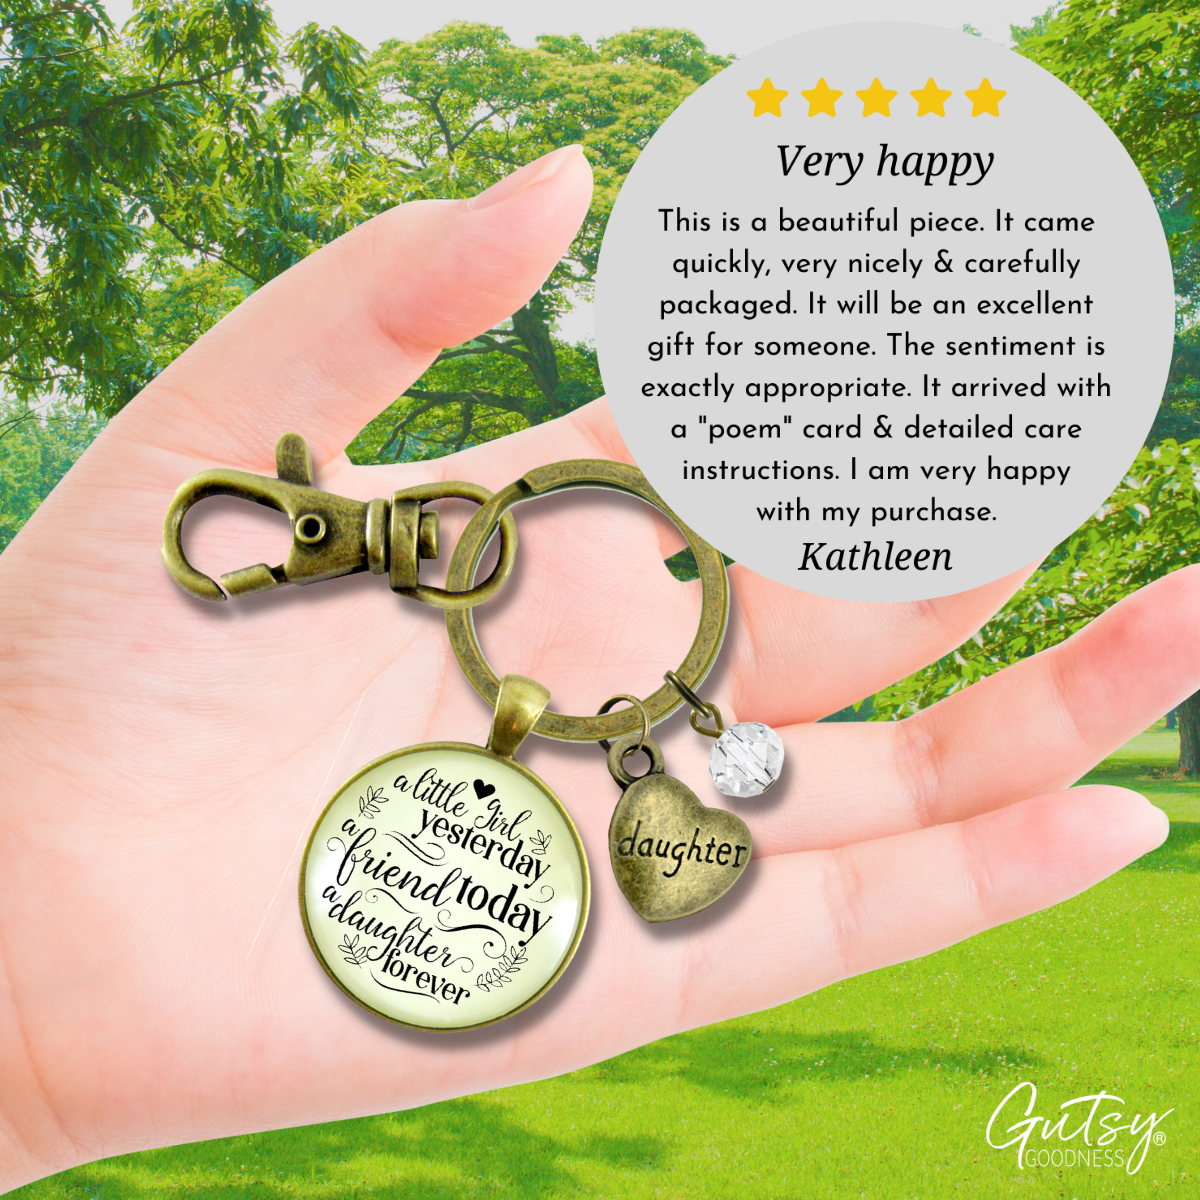 Dad Daughter Keychain A Little Girl Yesterday A Friend Today Keepsake Jewelry From Father Gift - Gutsy Goodness Handmade Jewelry;Dad Daughter Keychain A Little Girl Yesterday A Friend Today Keepsake Jewelry From Father Gift - Gutsy Goodness Handmade Jewelry Gifts